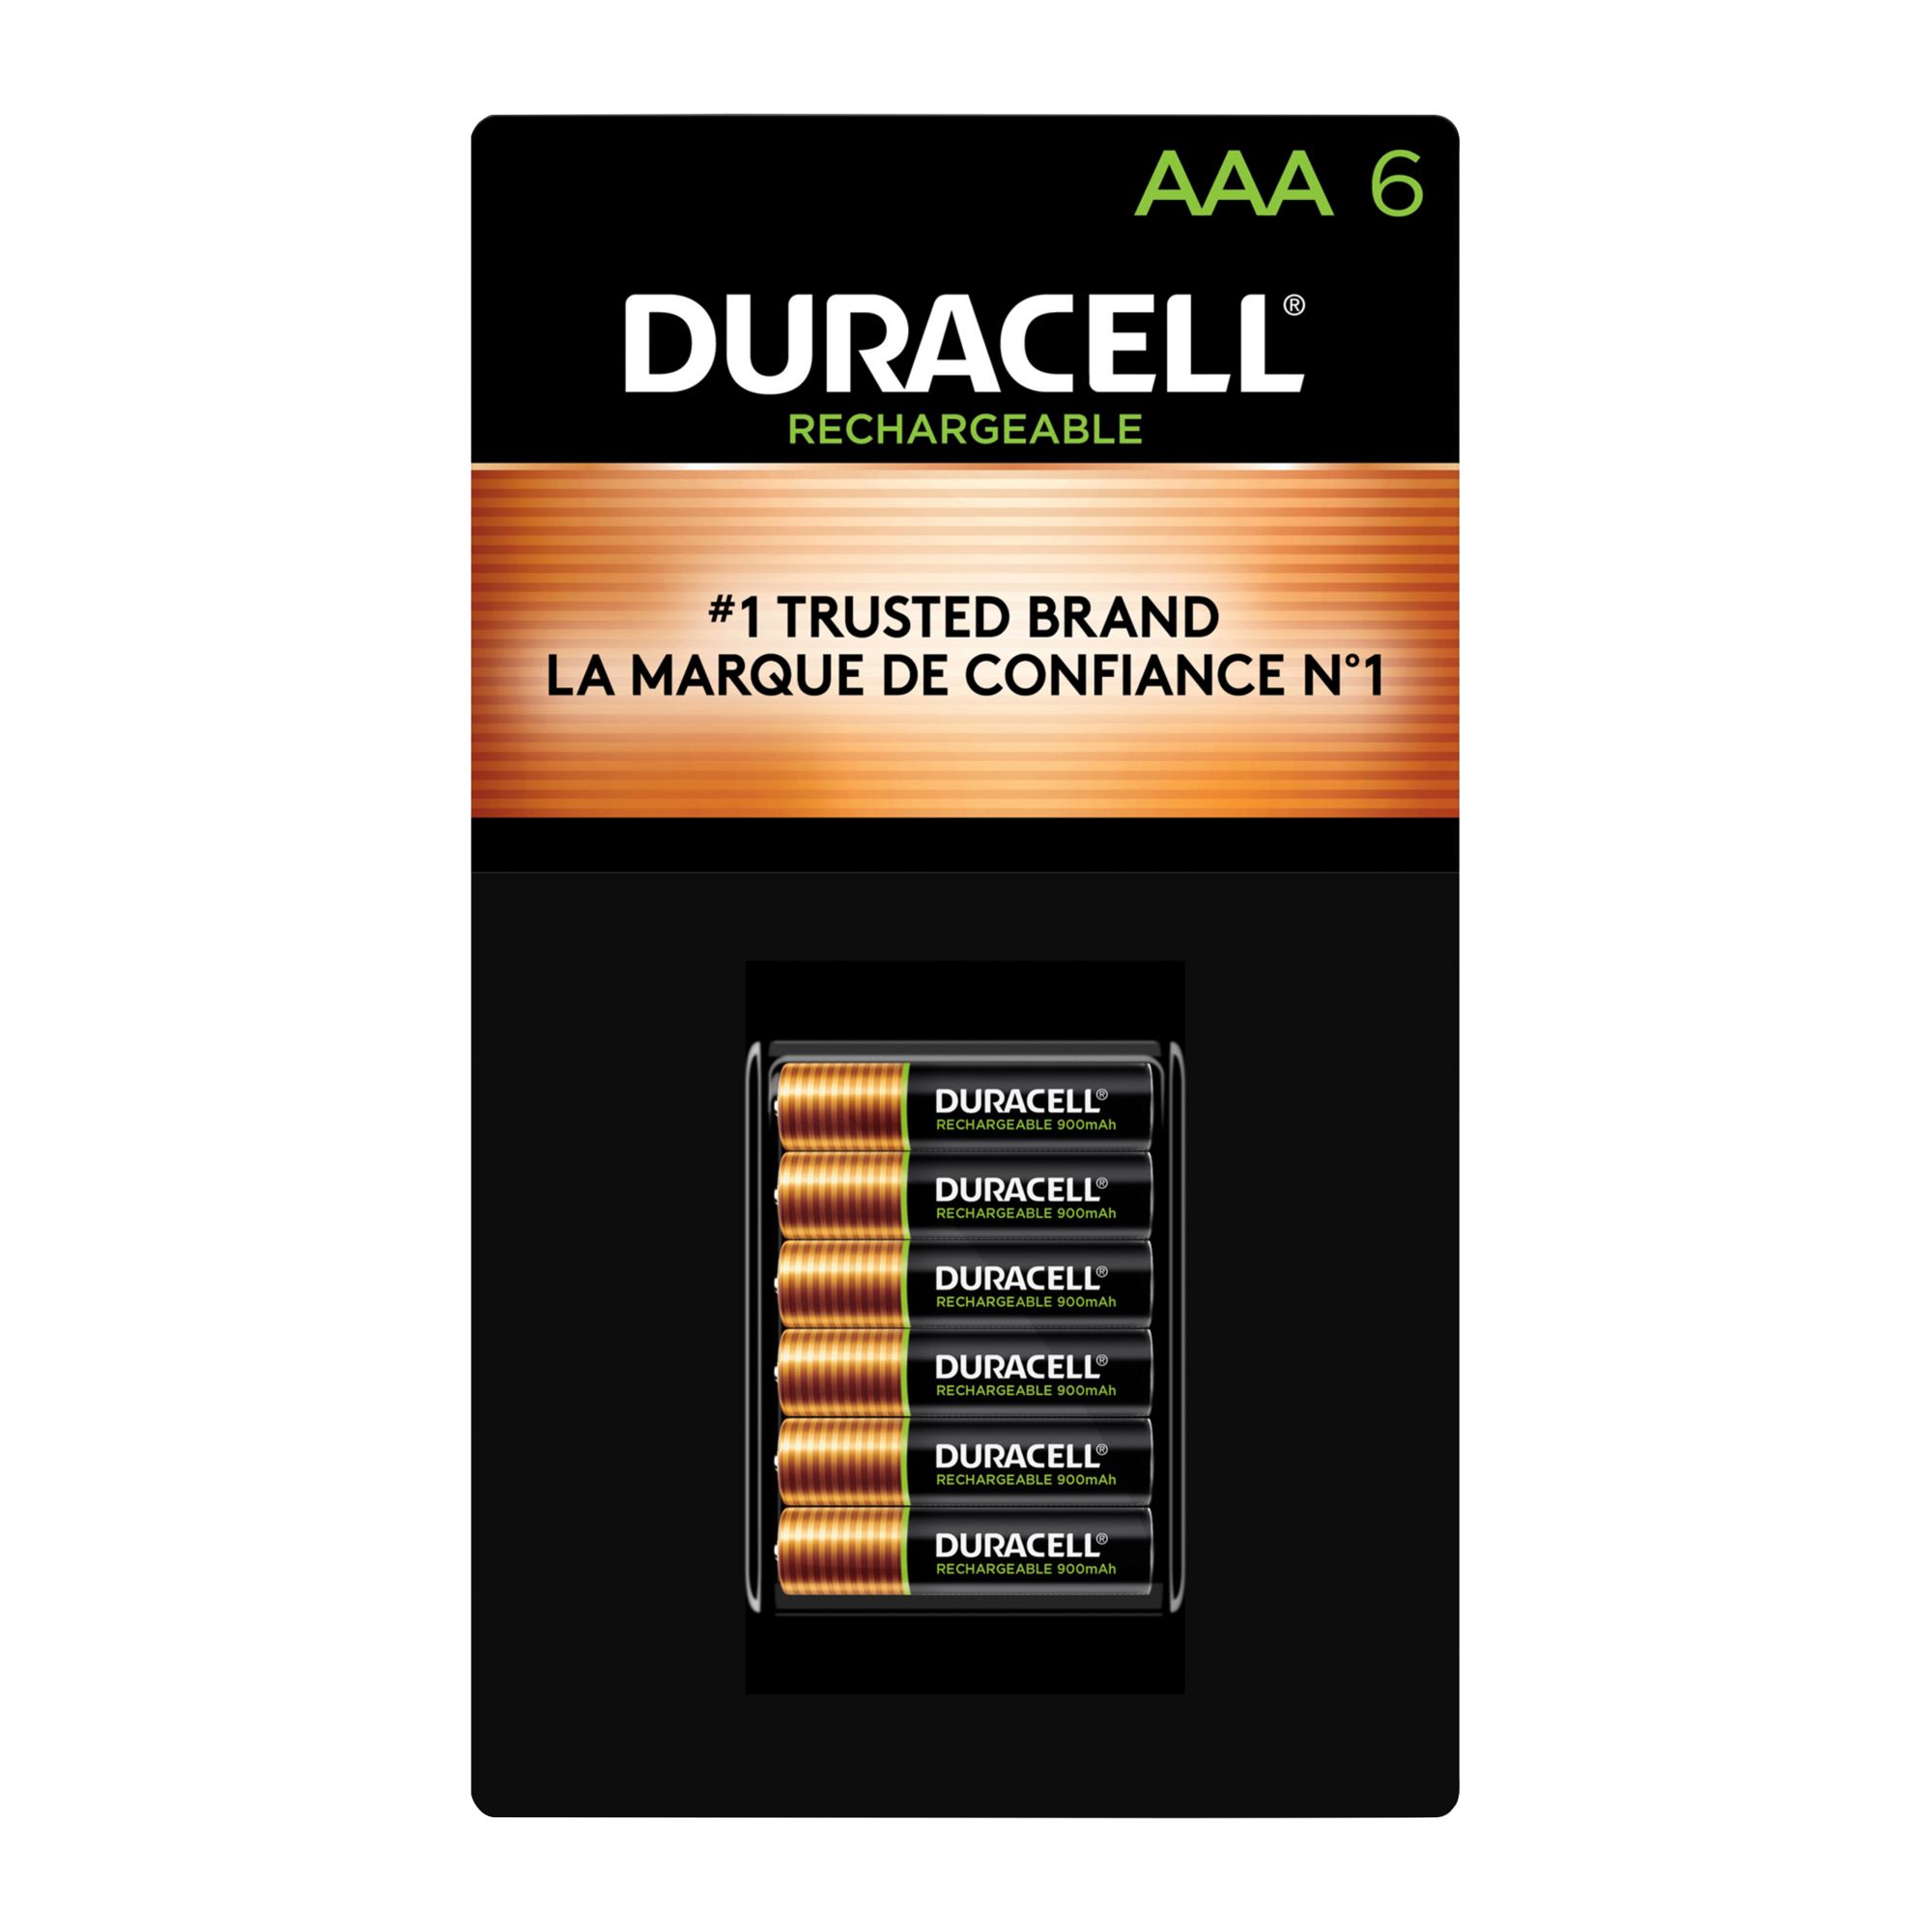 Duracell Rechargeable AAA Batteries, 4 Count Pack, Triple A Battery for  Long-lasting Power, All-Purpose Pre-Charged Battery for Household and  Business Devices 